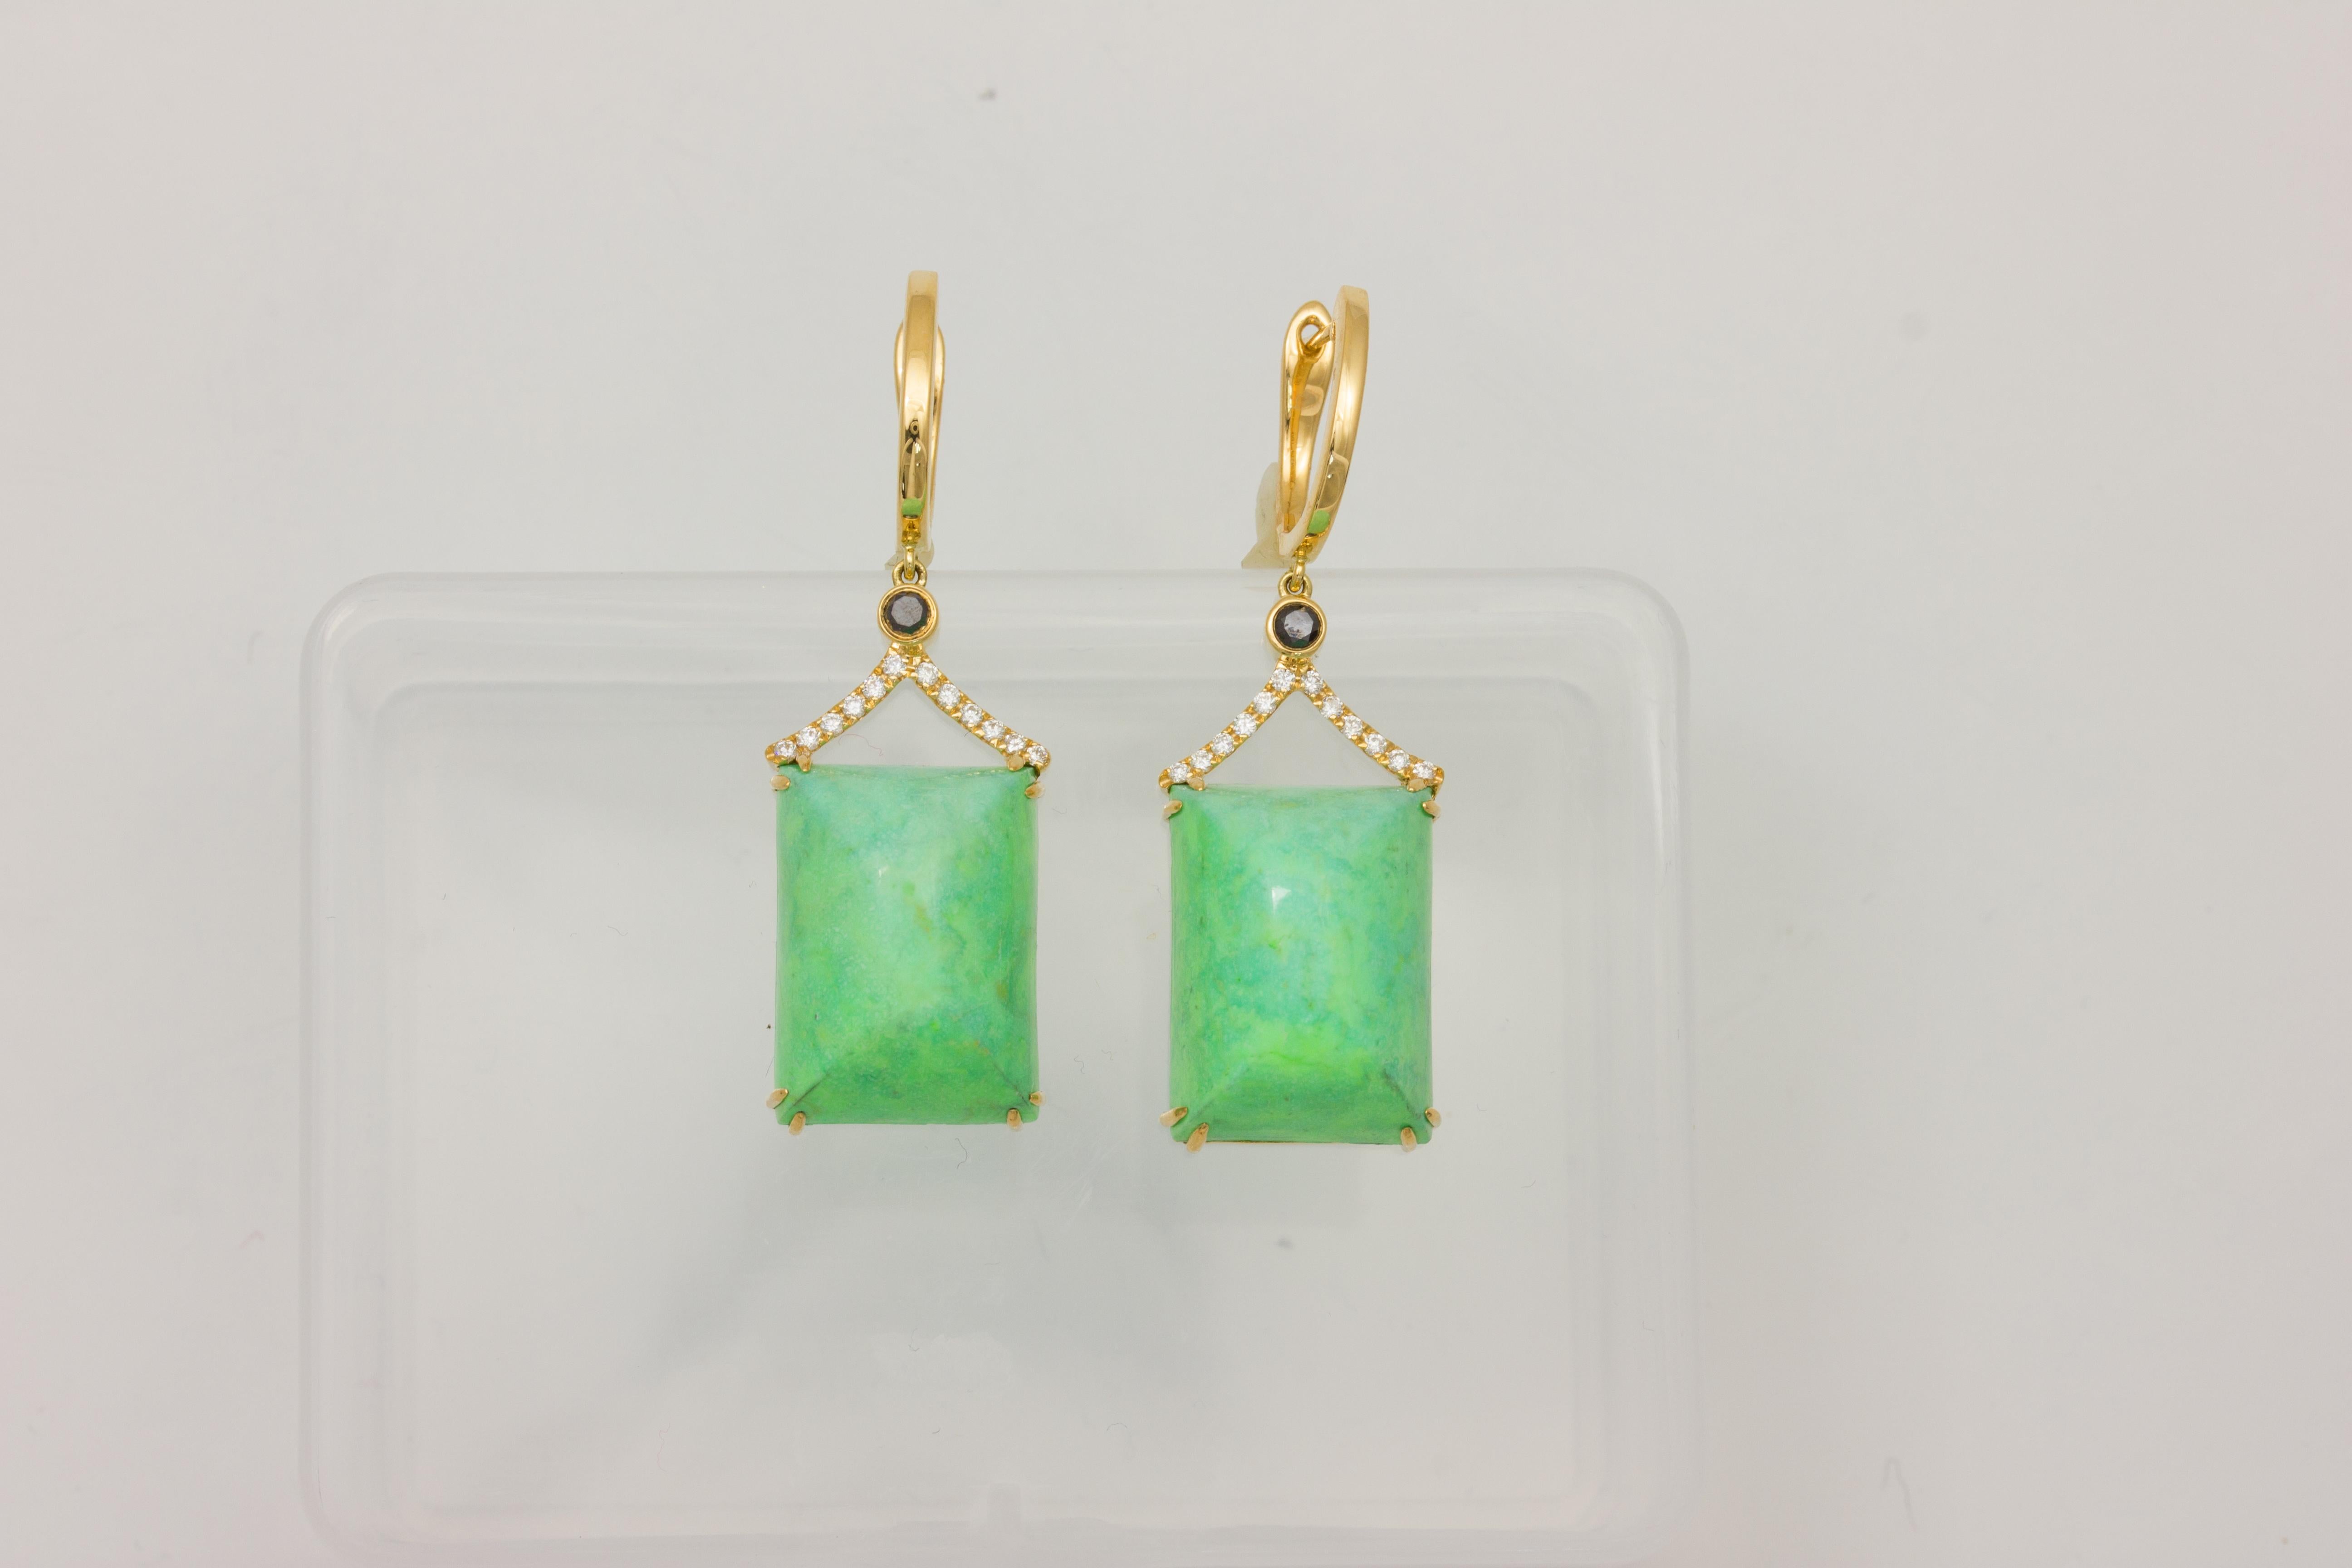 Contemporary Frederic Sage Green Turquoise Black Diamond Earrings For Sale